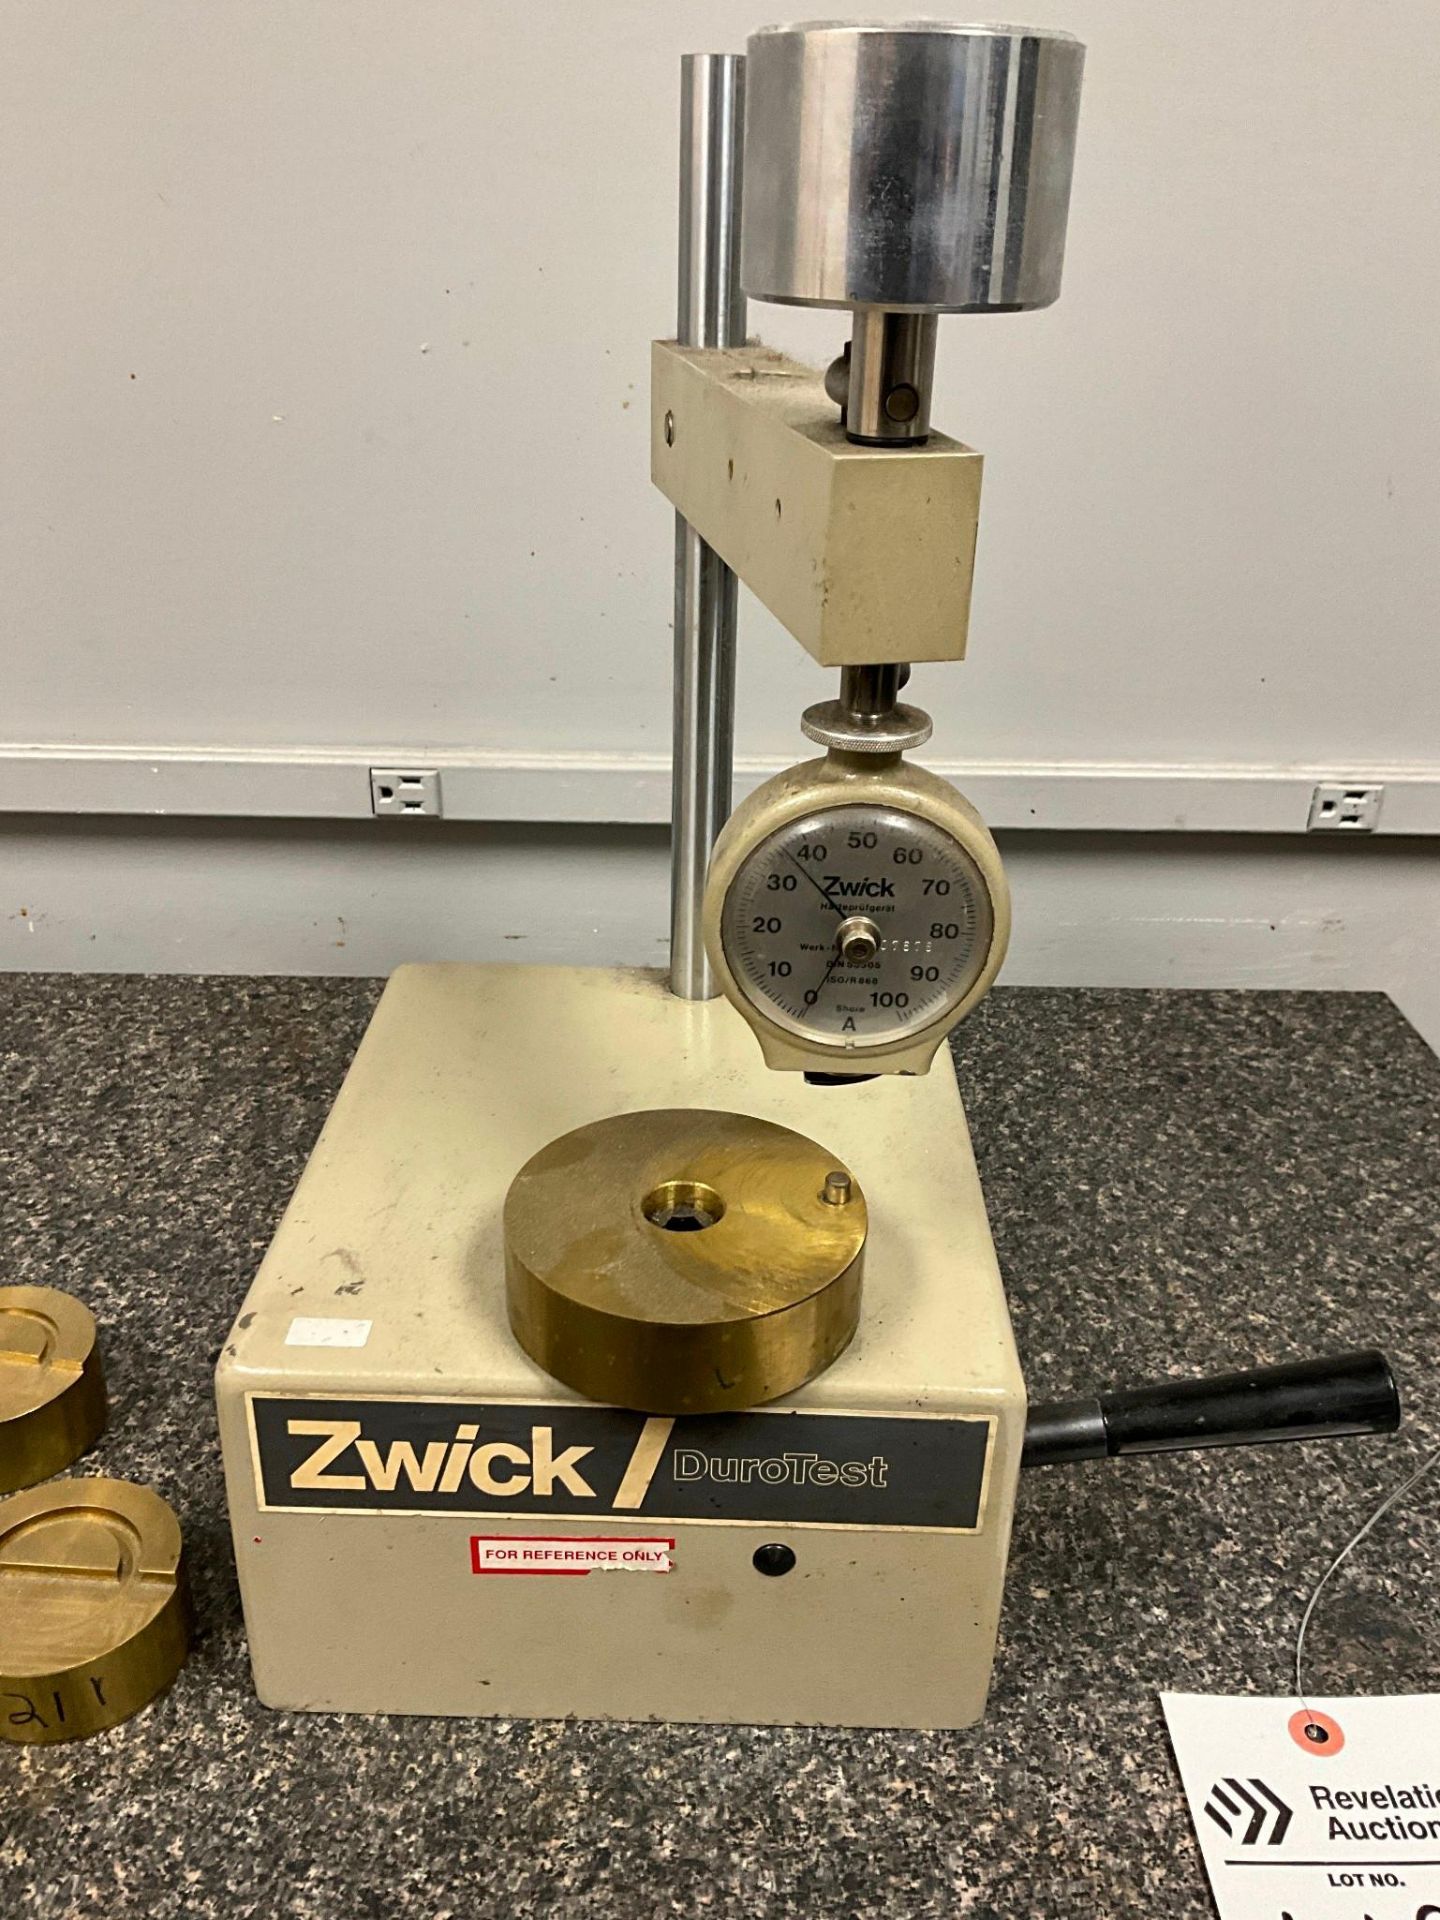 ZWICK DUROTEST 7206.07 MATERIAL HARDNESS TESTER - Image 2 of 5